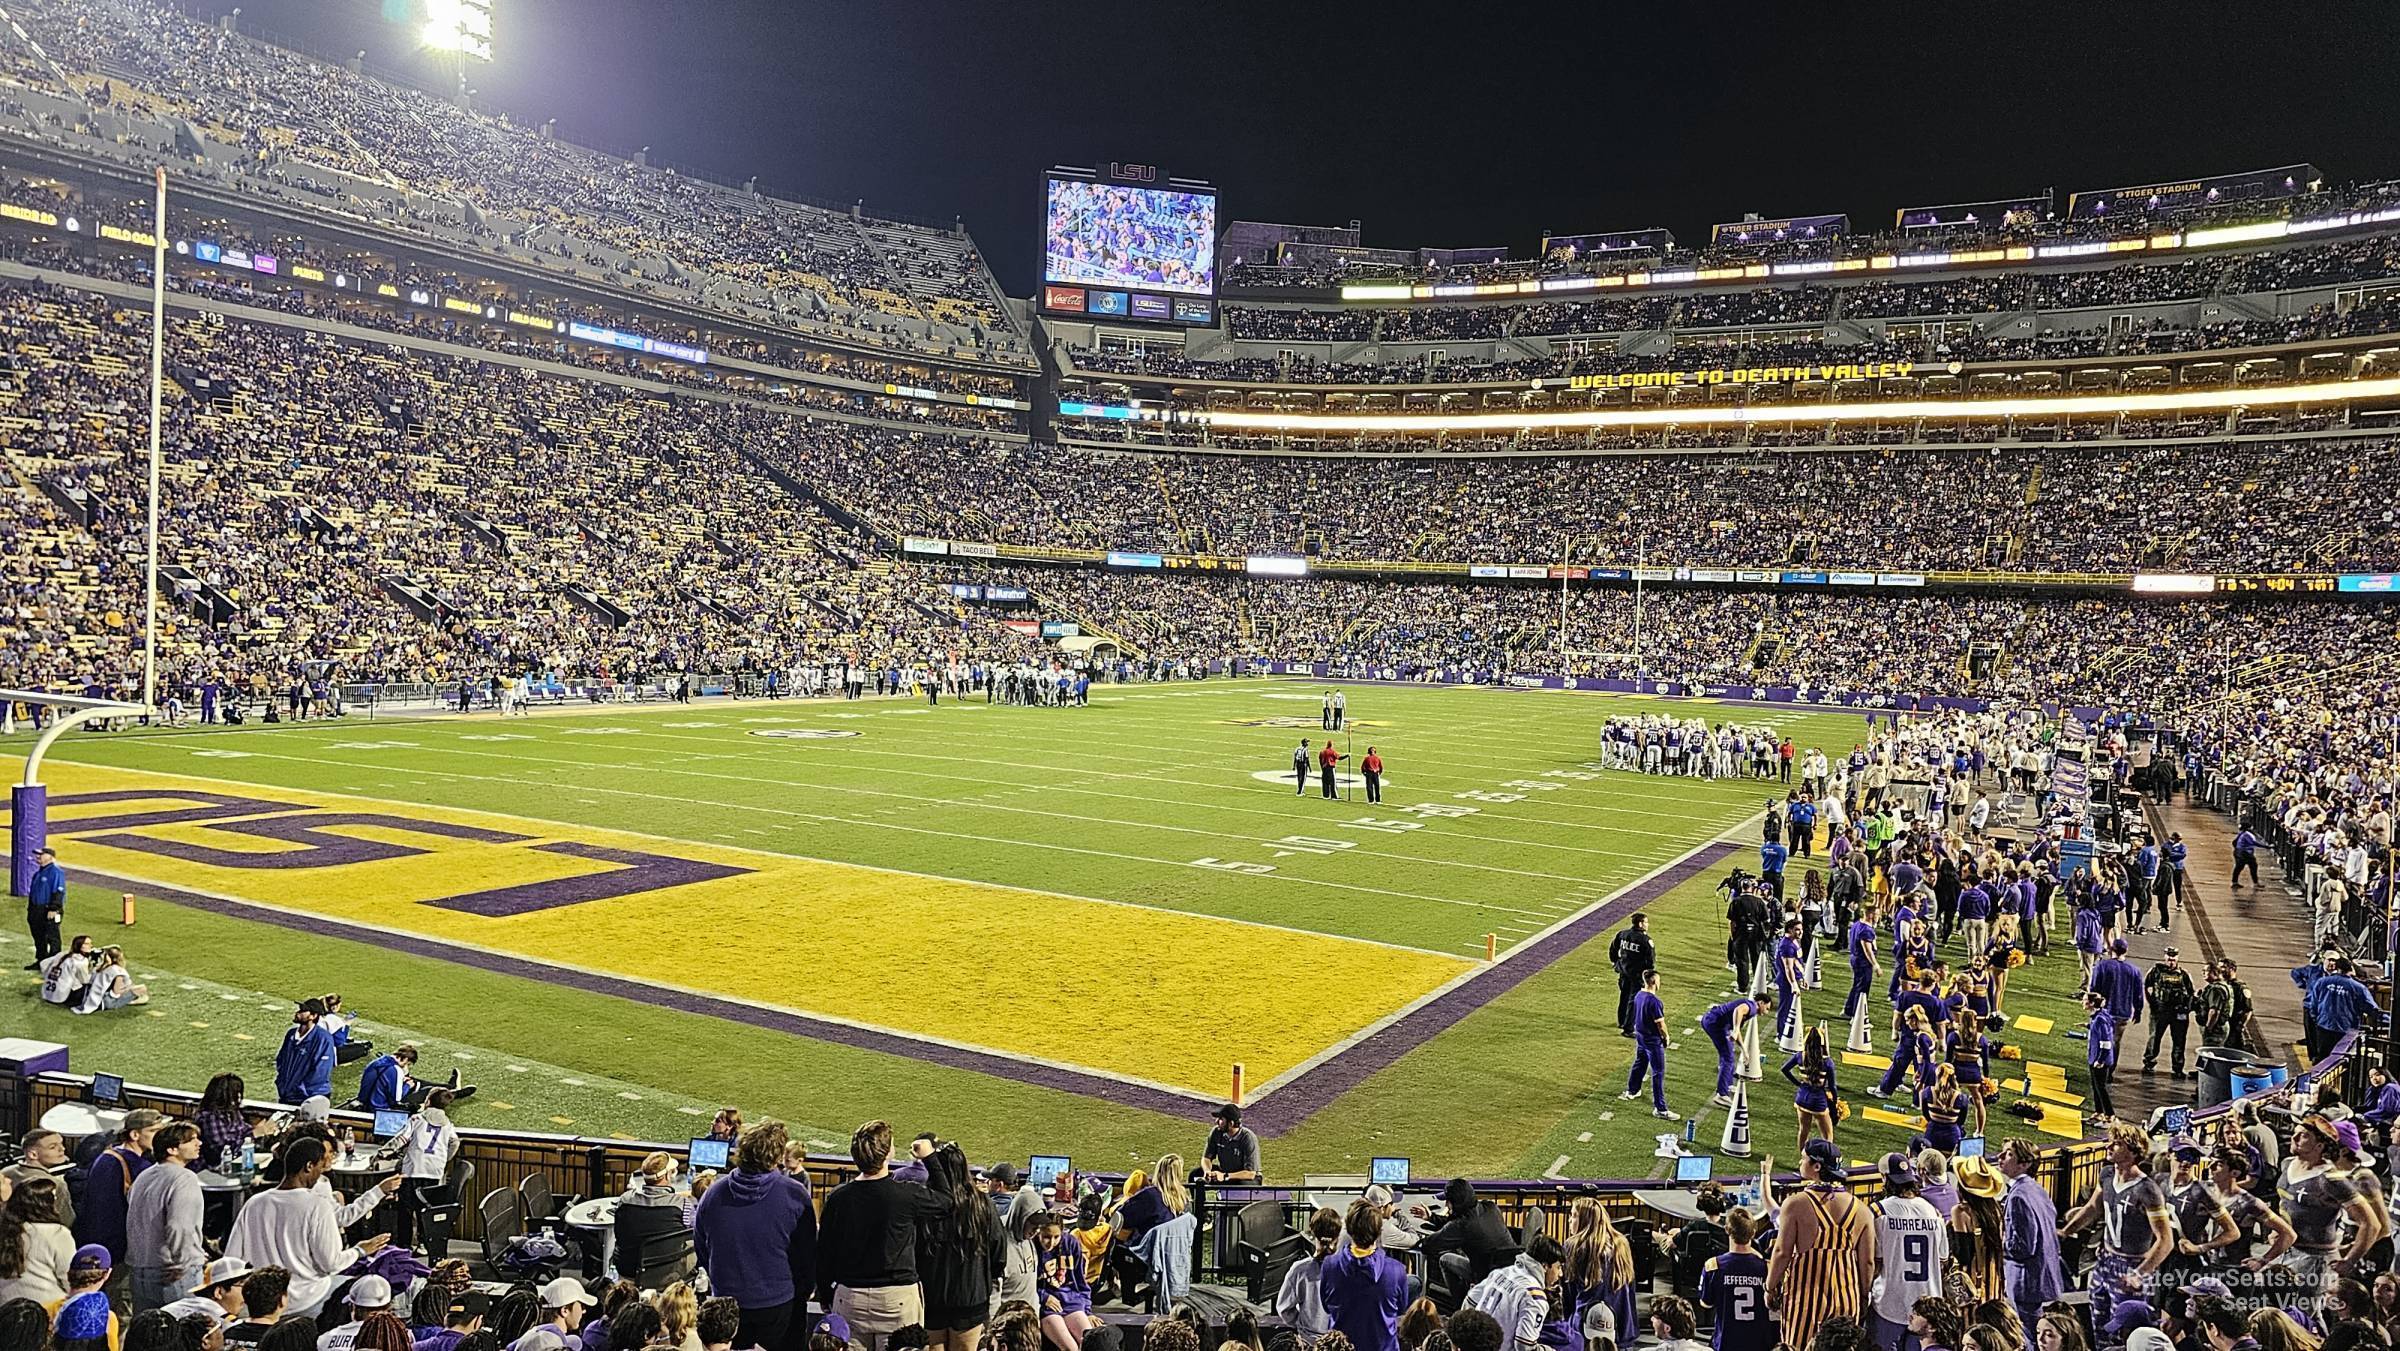 section 203, row 13 seat view  - tiger stadium